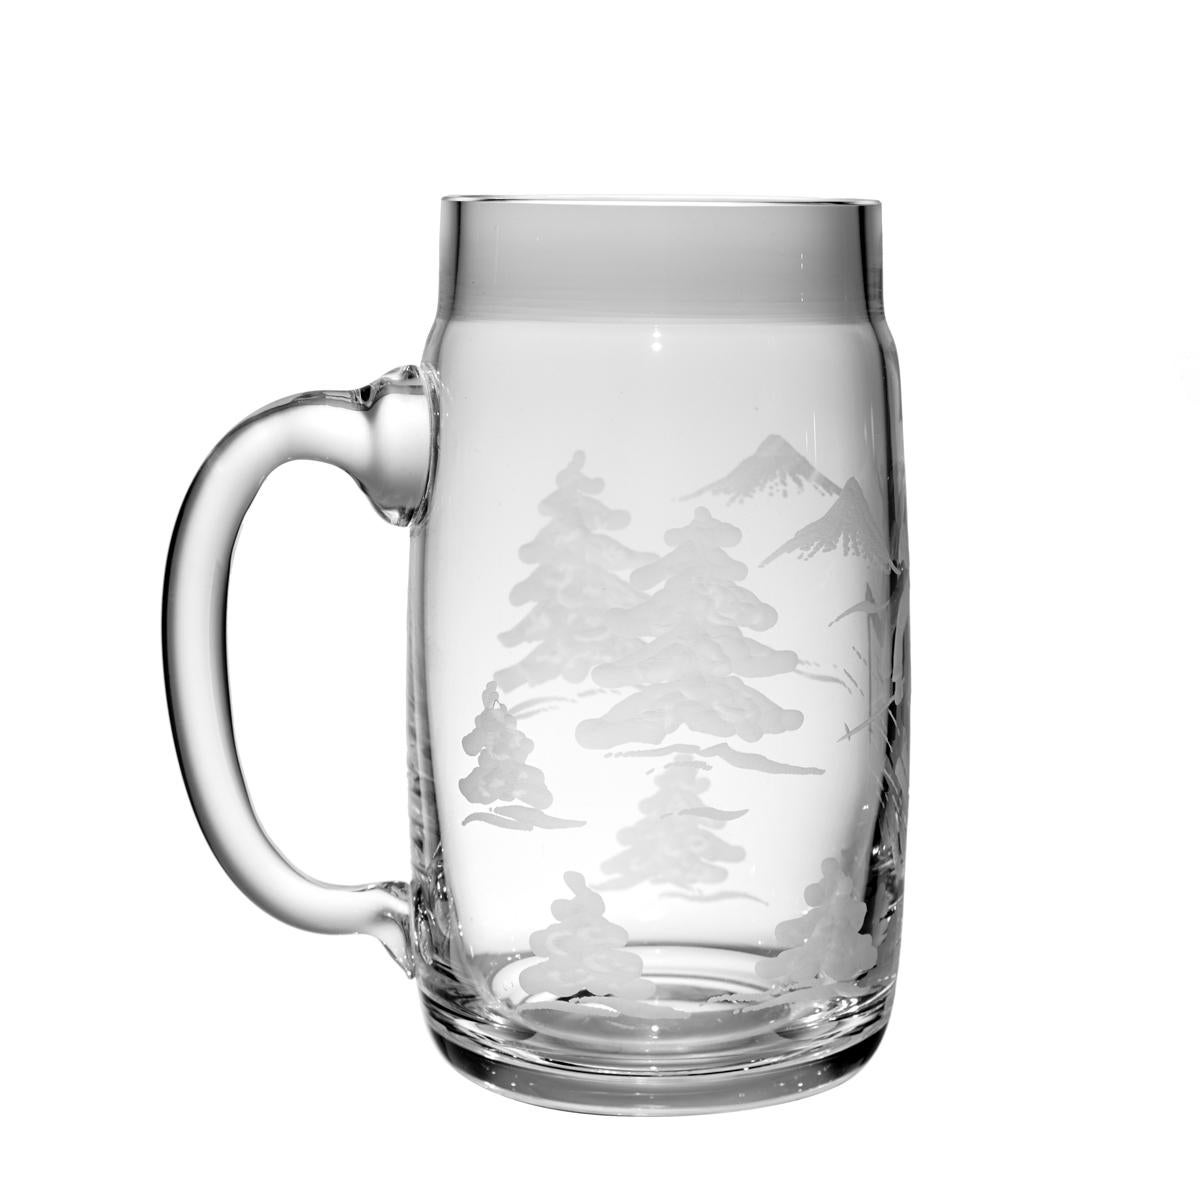 Country Style beer glass called Bierseidl in clear crystal glass. Hand blown in Bavaria and hand-engraved with trees and a skier boy for 0.7 liter beer. Can be ordered also with six different hunting animals like gams Capricorn wild boar. Can be